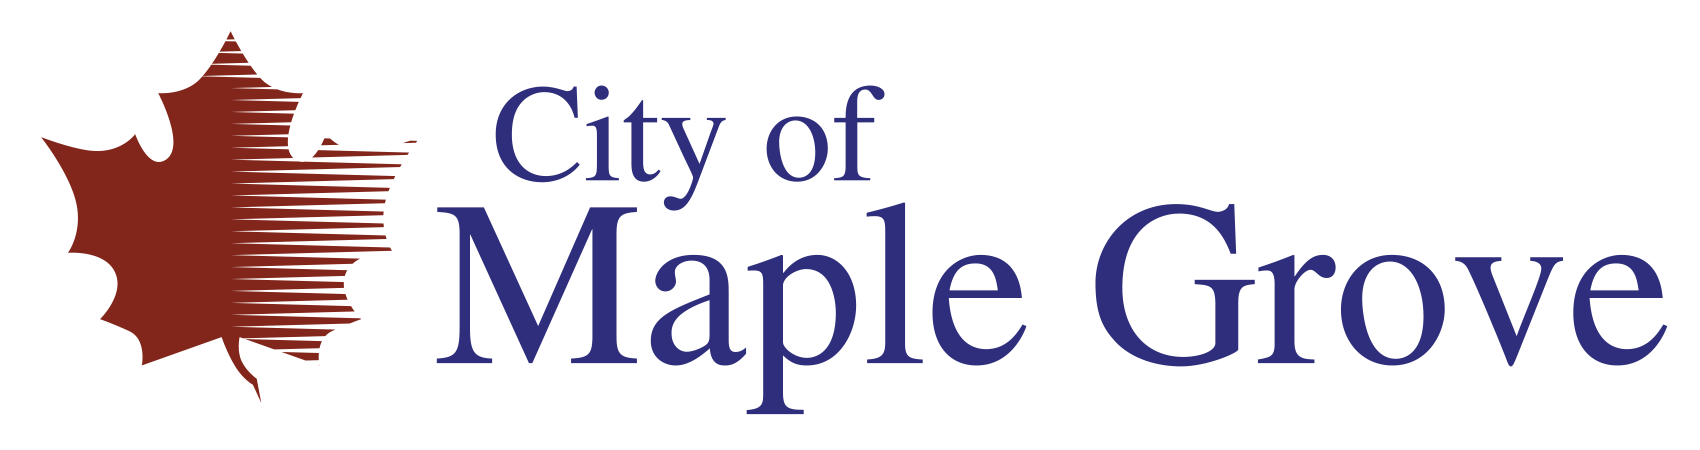 City of Maple Grove Home Page